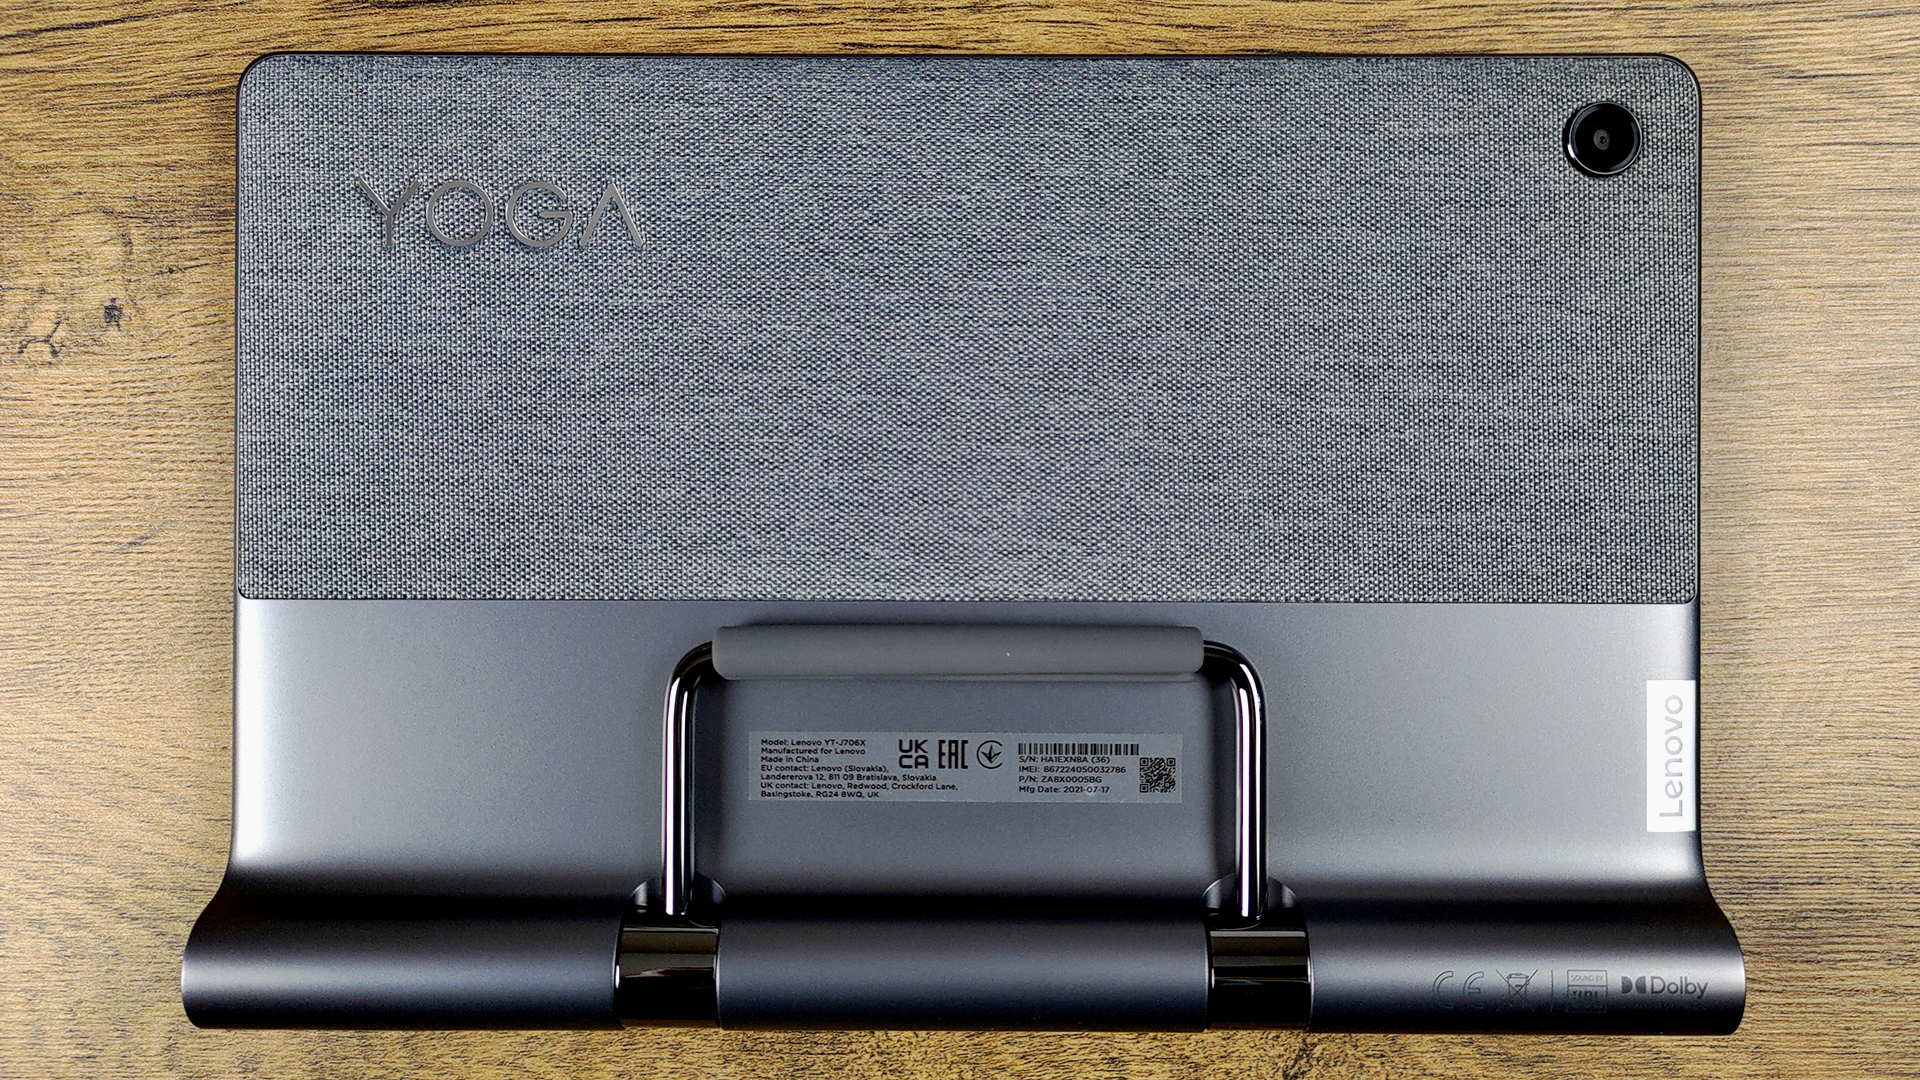 Lenovo Yoga Tab 11 review - an affordable tablet with a niche